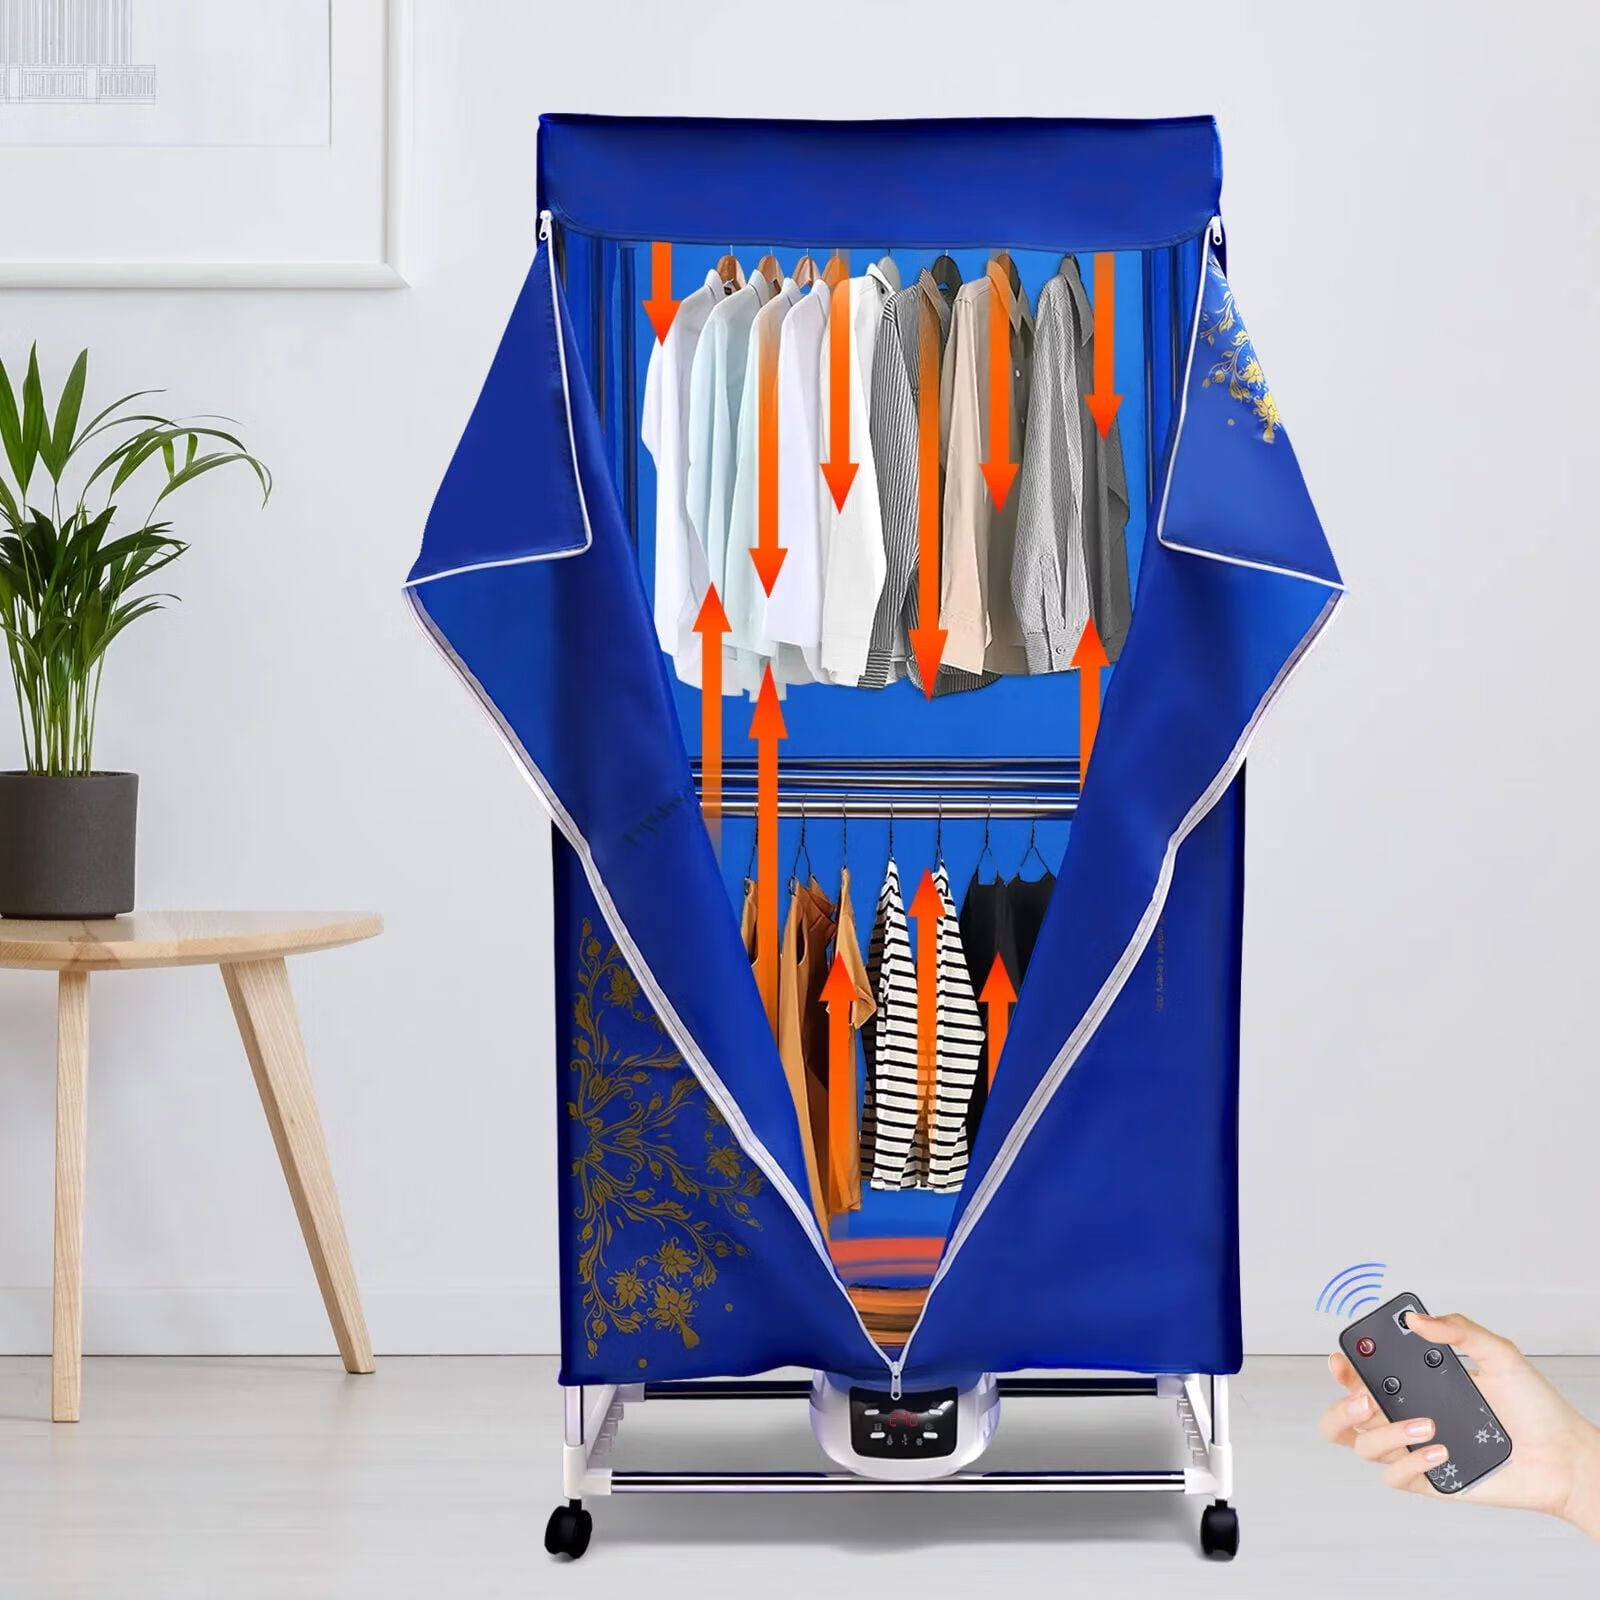 Dry your clothes on holiday with the Portable Laundry Dryer 